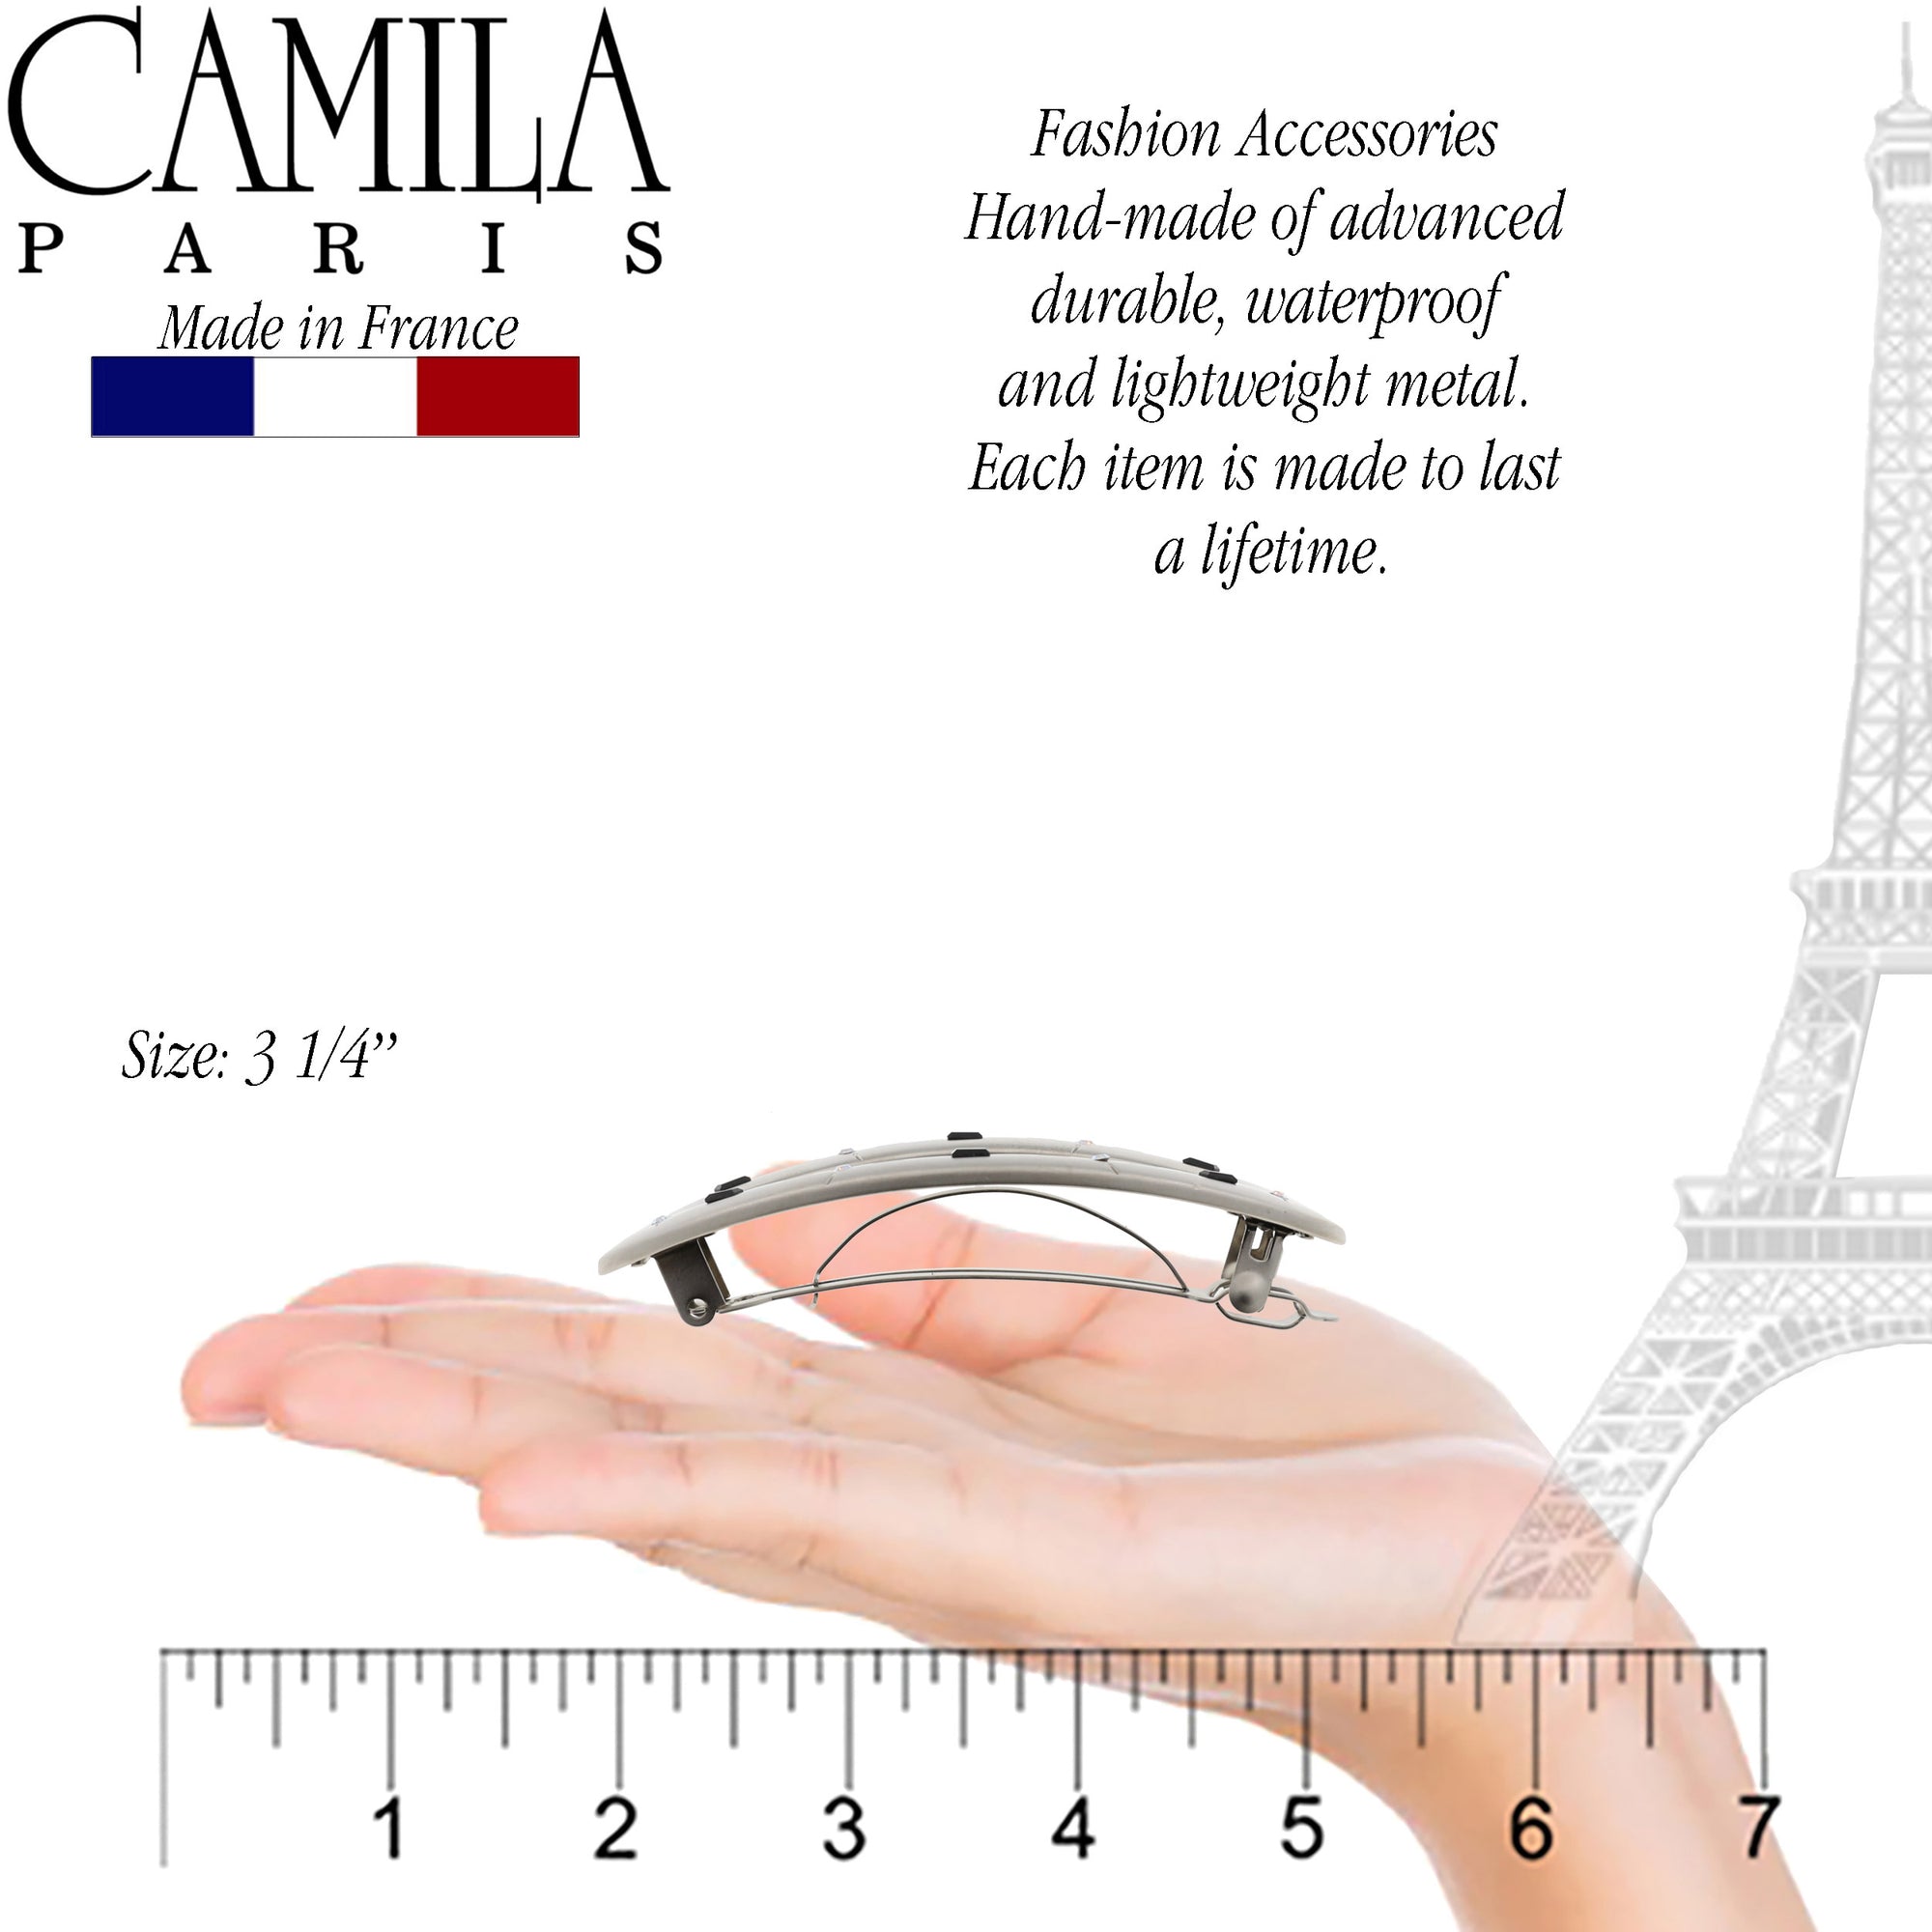 Camila Paris GA250 3.25 Inch Oval Hair Barrette Clip for Girls, Metal Silver, French Hair Accessories for Women, Handmade with Swarovski Crystals Stones. Styling Girls Hair Ornaments. Made in France